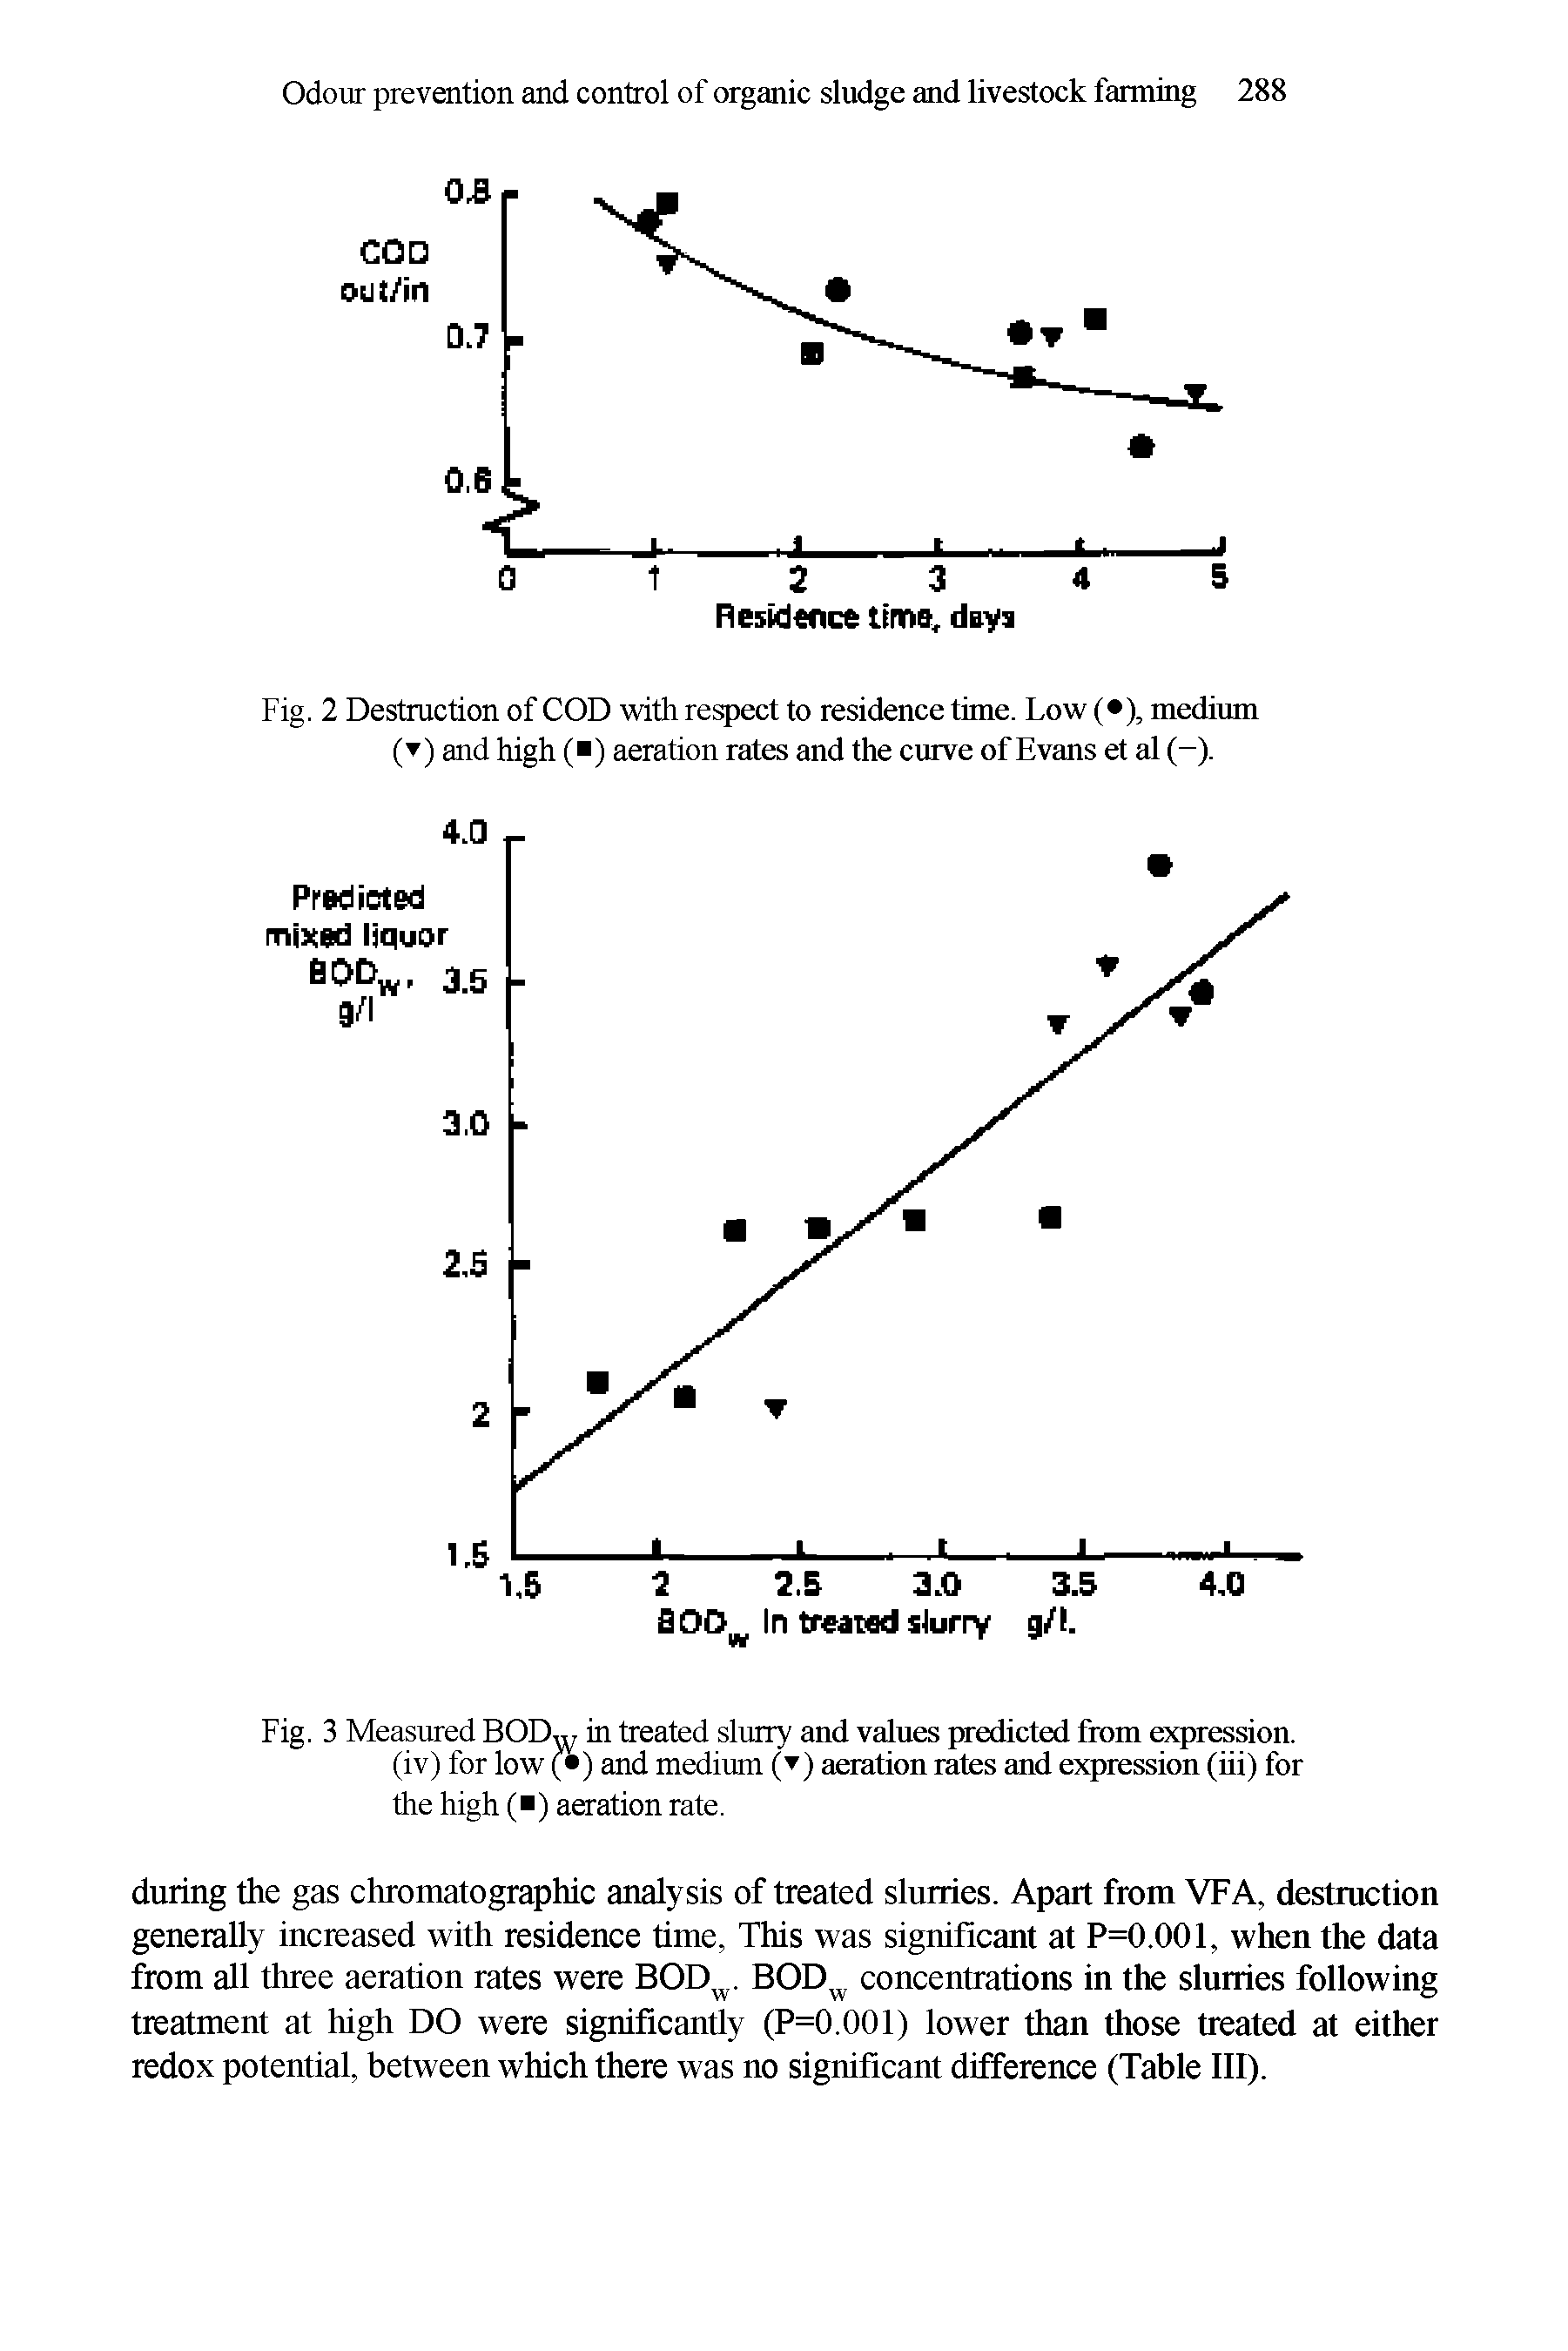 Fig. 3 Measured BOD, in treated slurry and values predicted from expression.